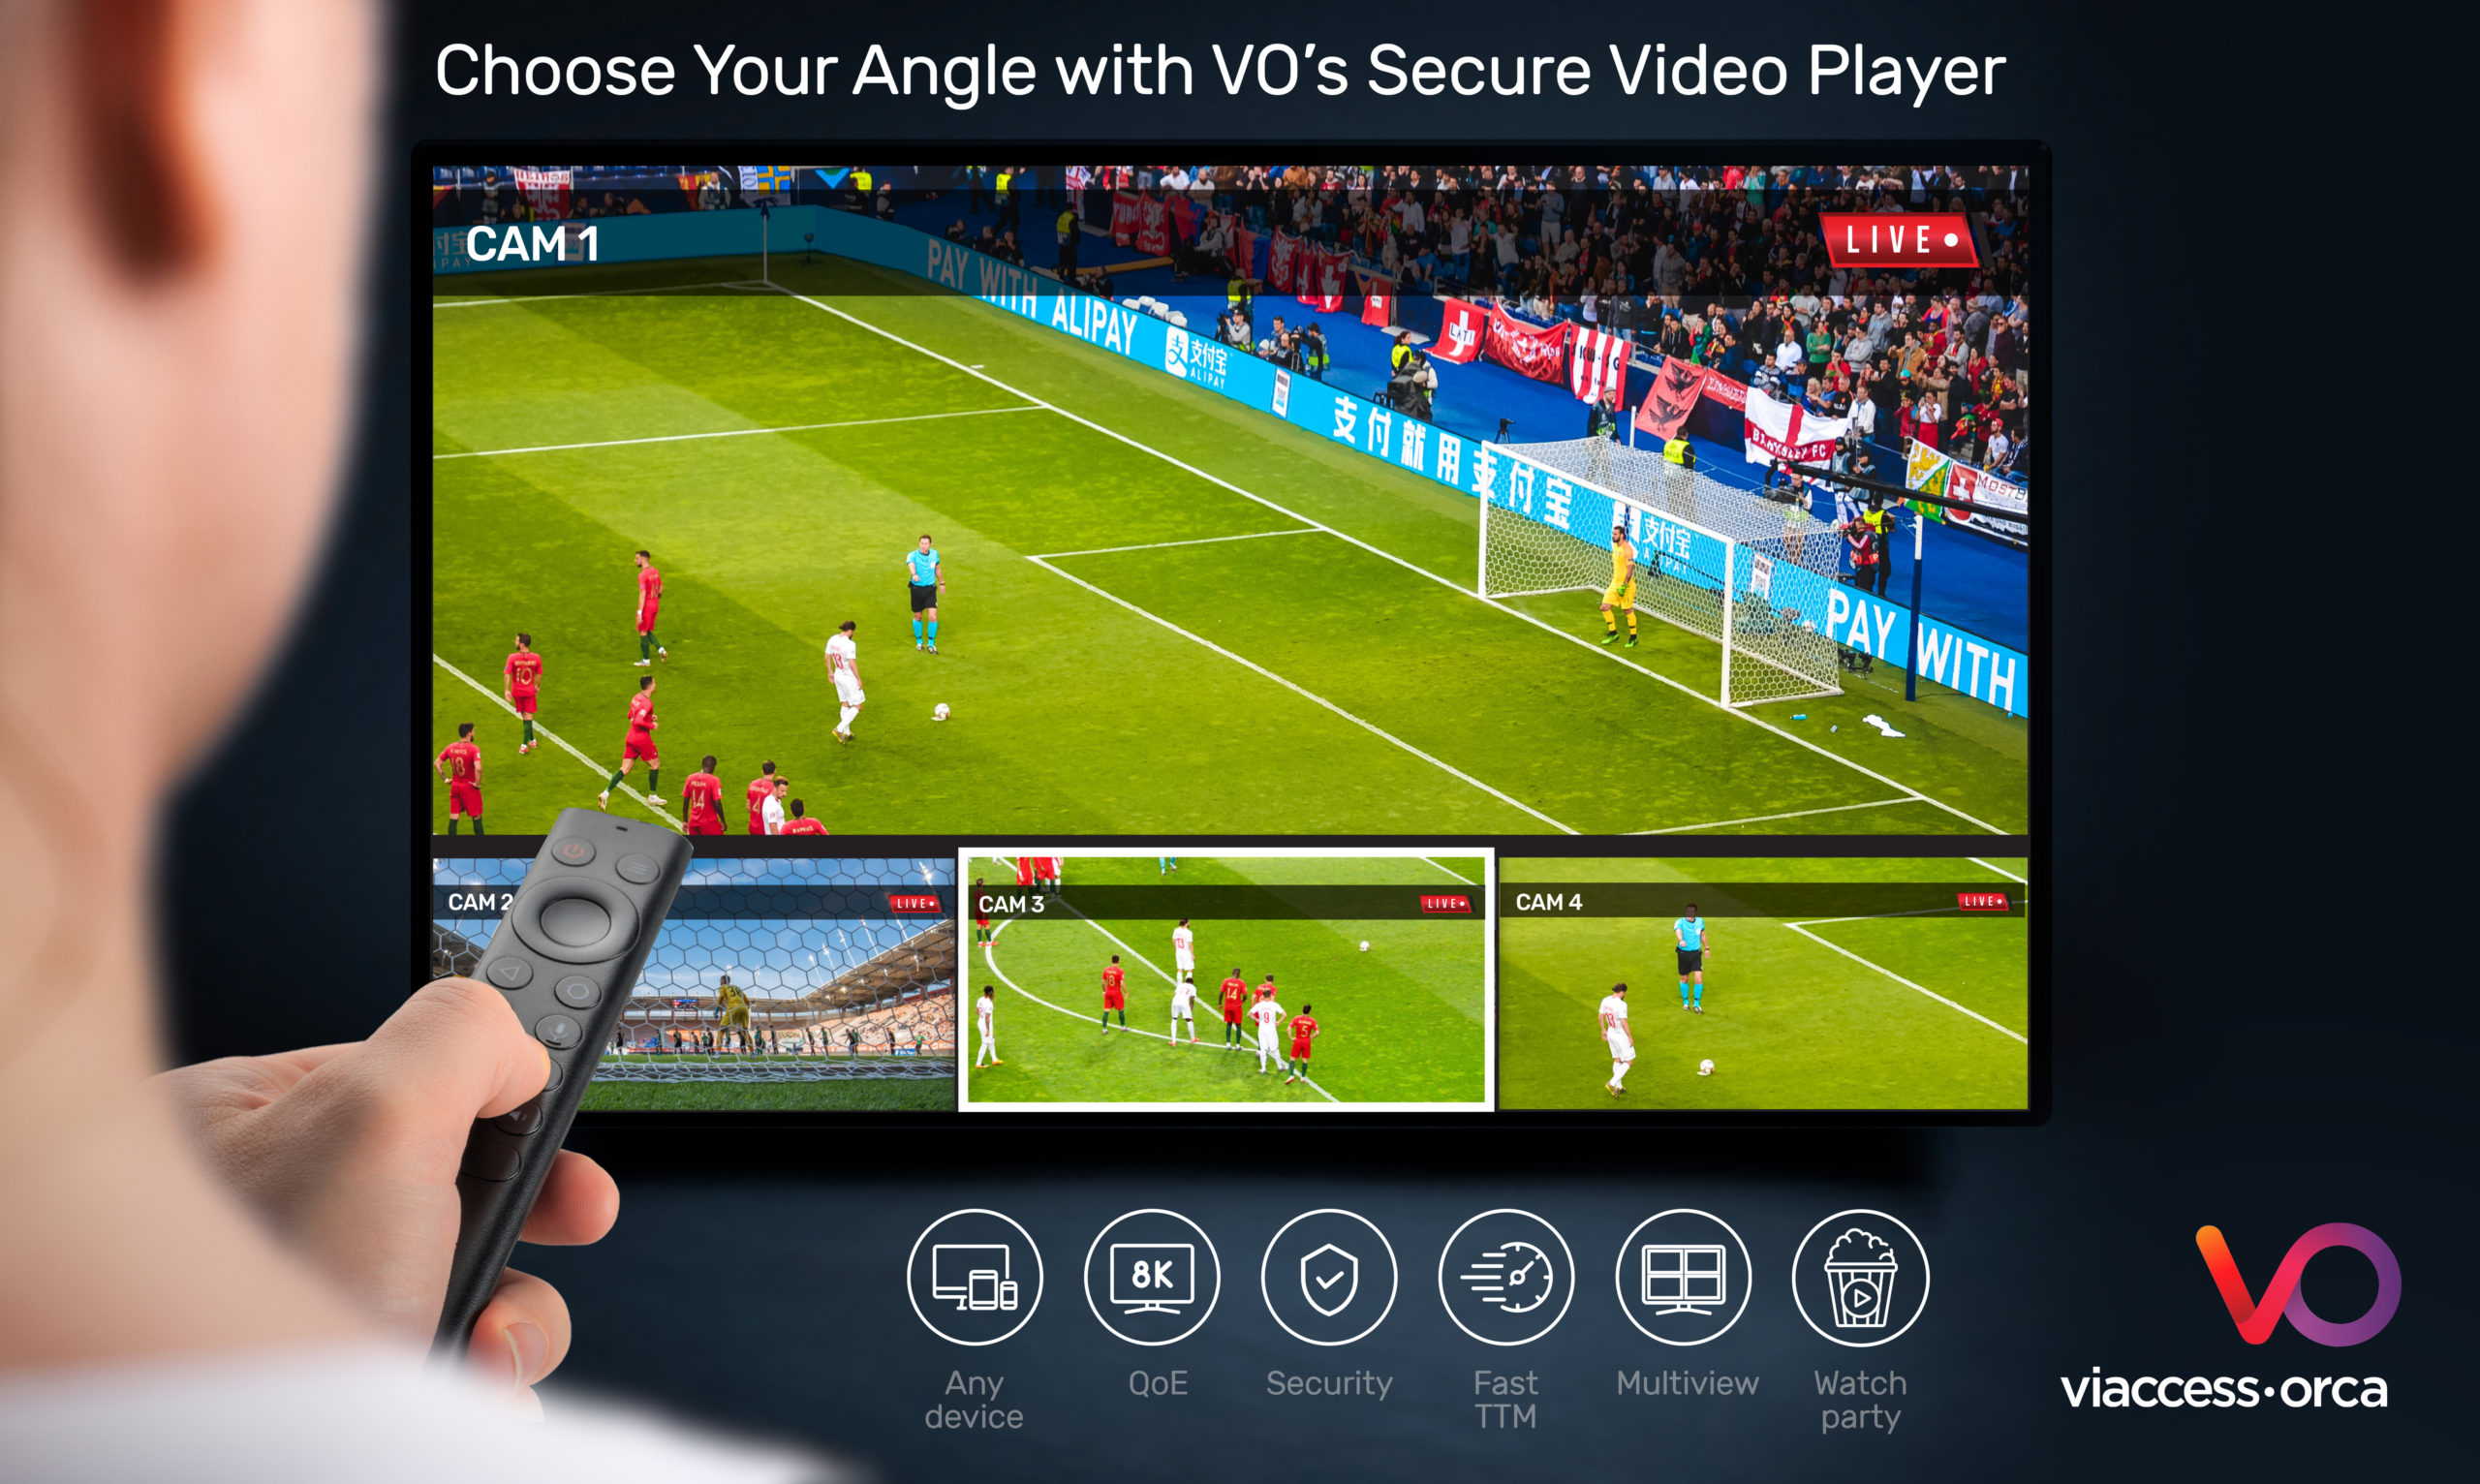 Viaccess Orca Secure Video Player